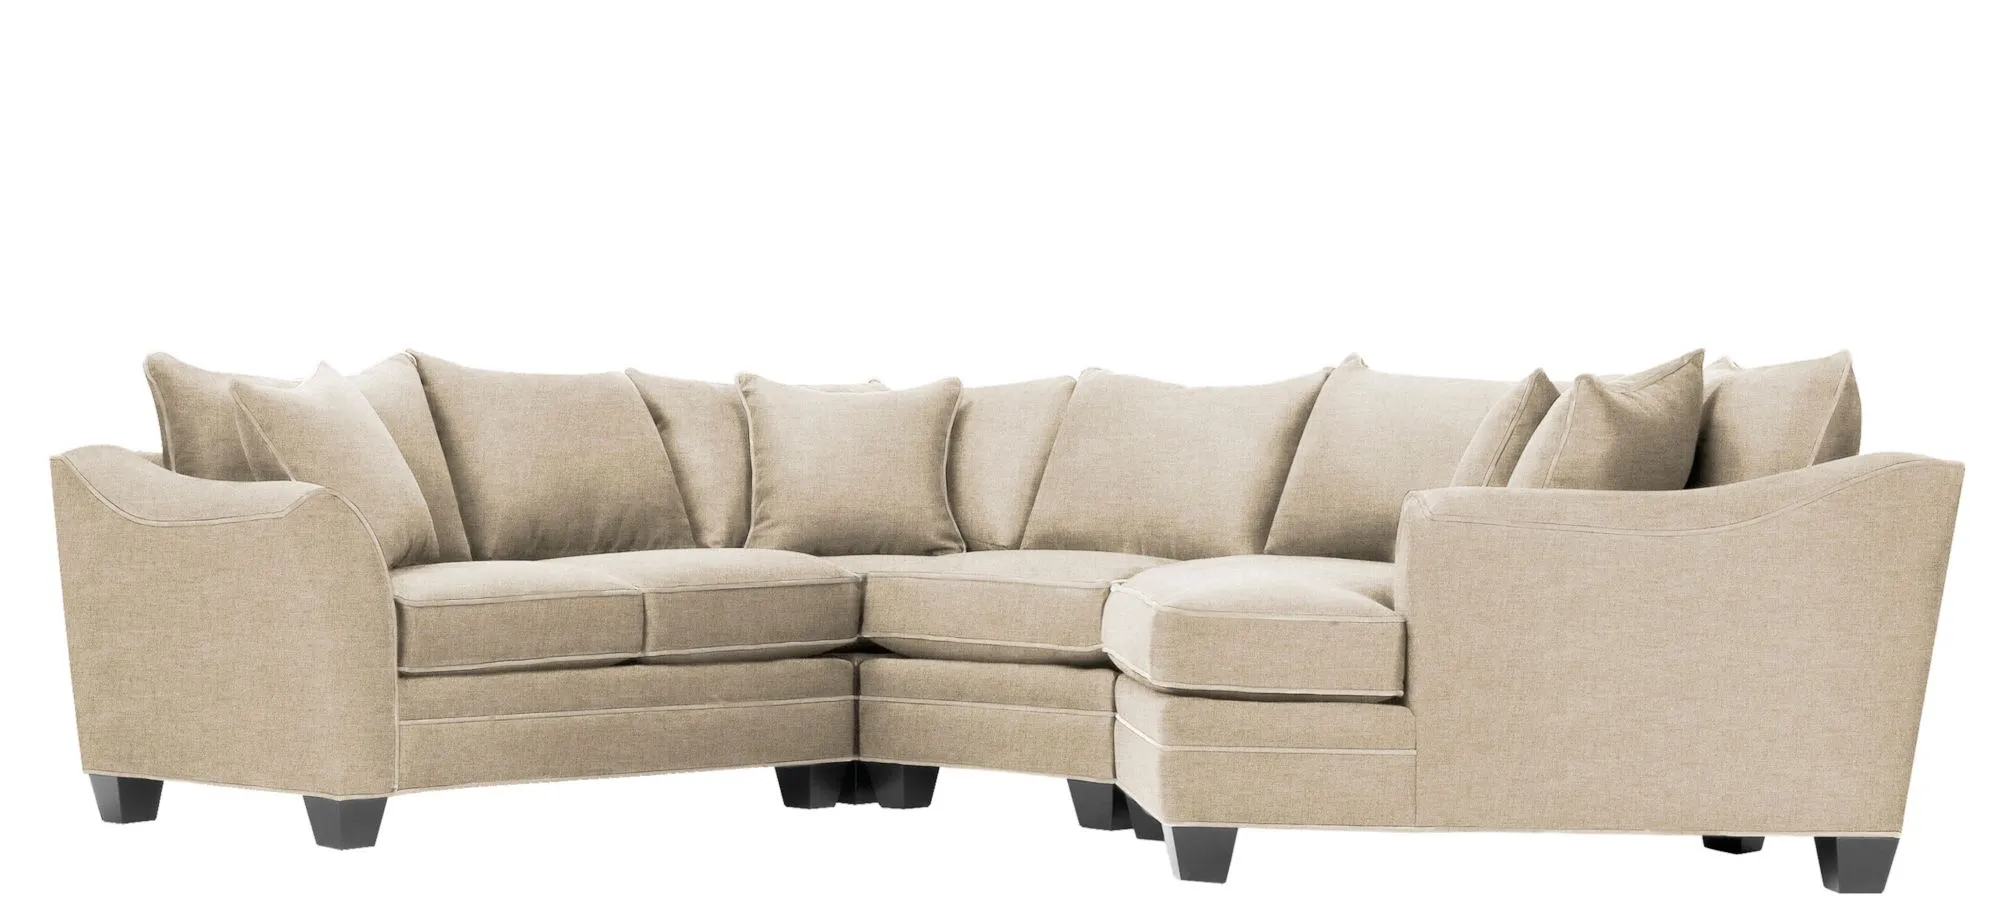 Foresthill 4-pc. Right Hand Cuddler Sectional Sofa in Santa Rosa Linen by H.M. Richards